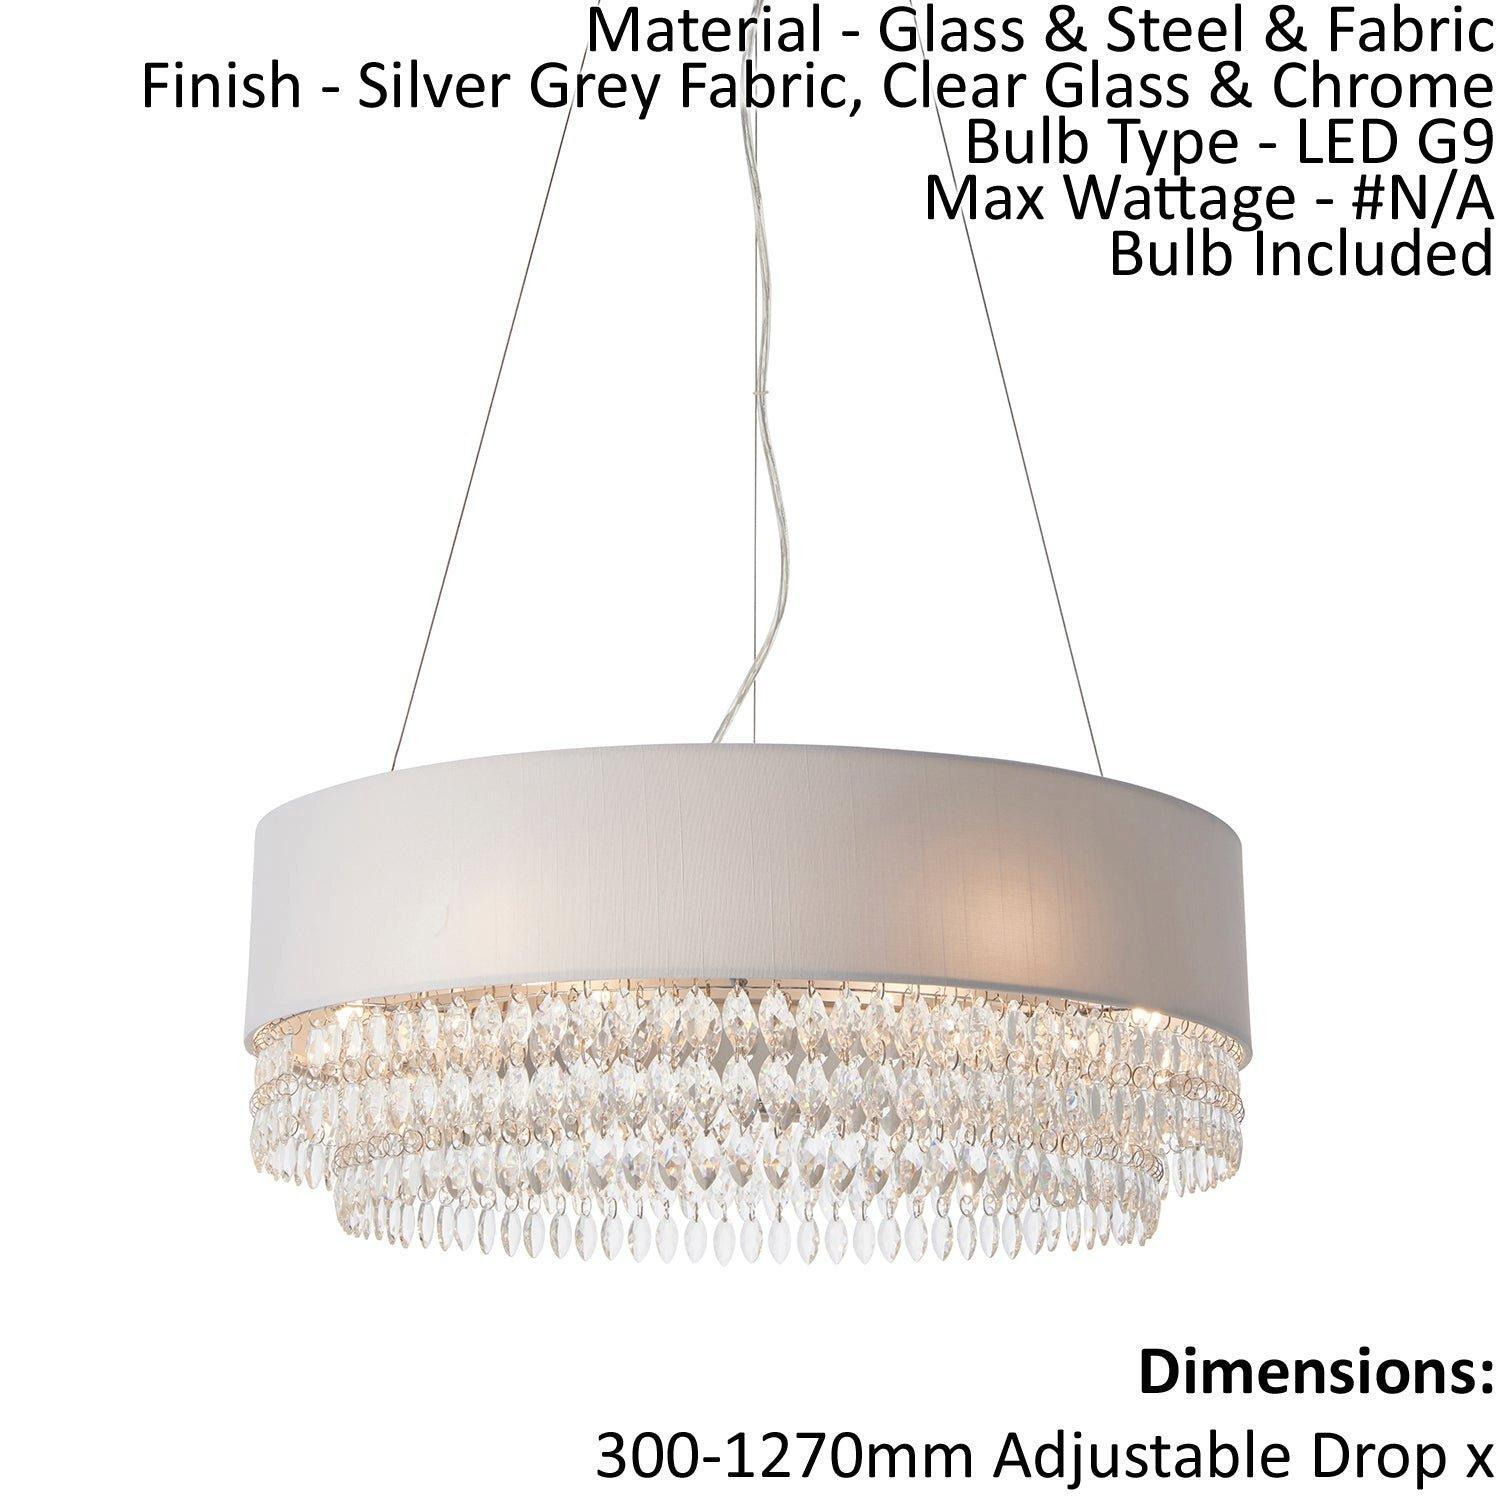 Ceiling Pendant Light - Silver Grey Fabric / Clear Glass & Chrome - 6x2.5W G9 - image 1